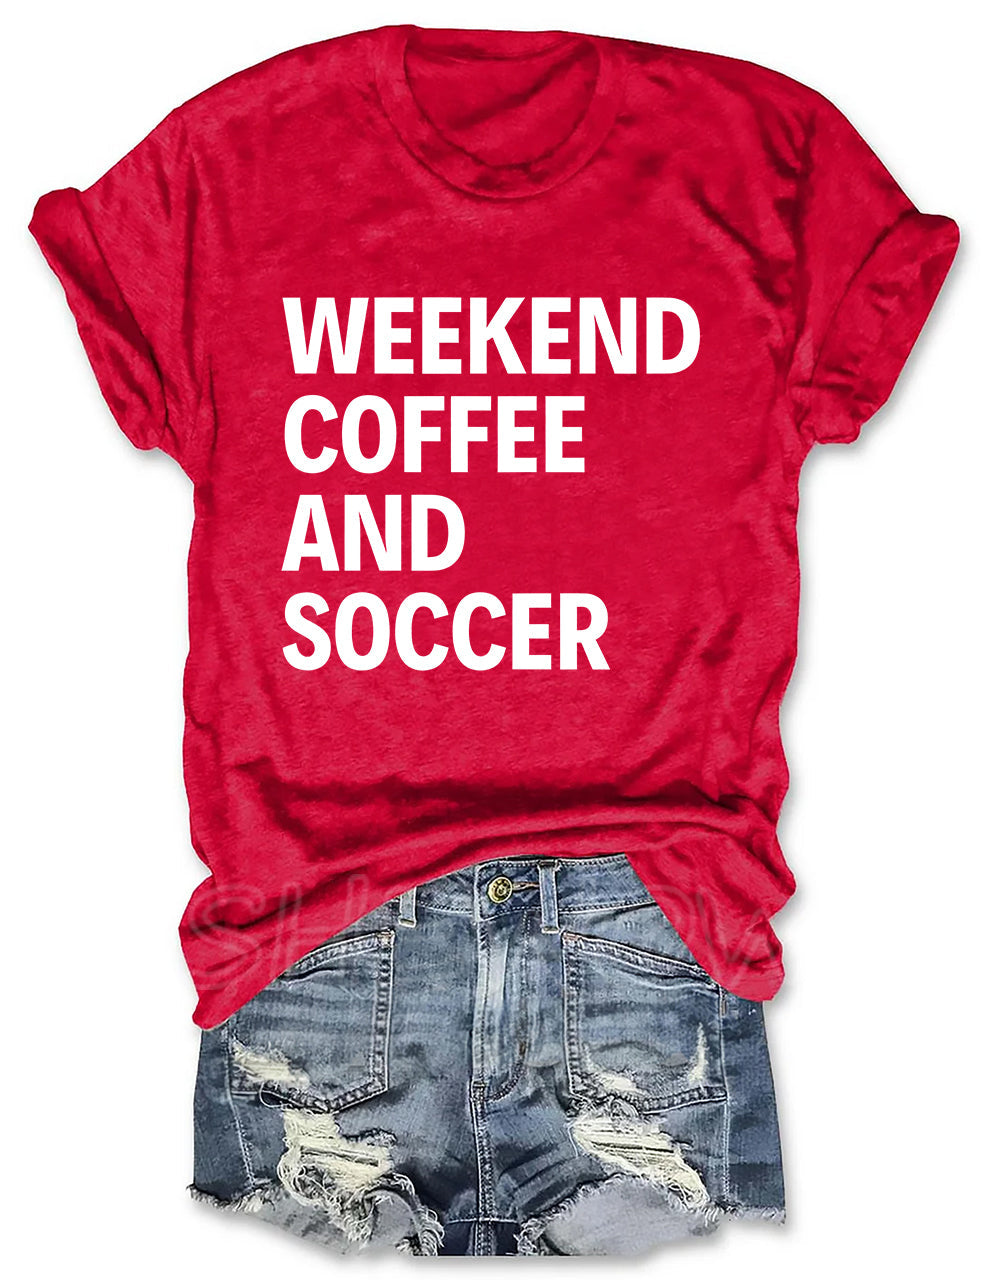 Weekend Coffee And Soccer T-shirt